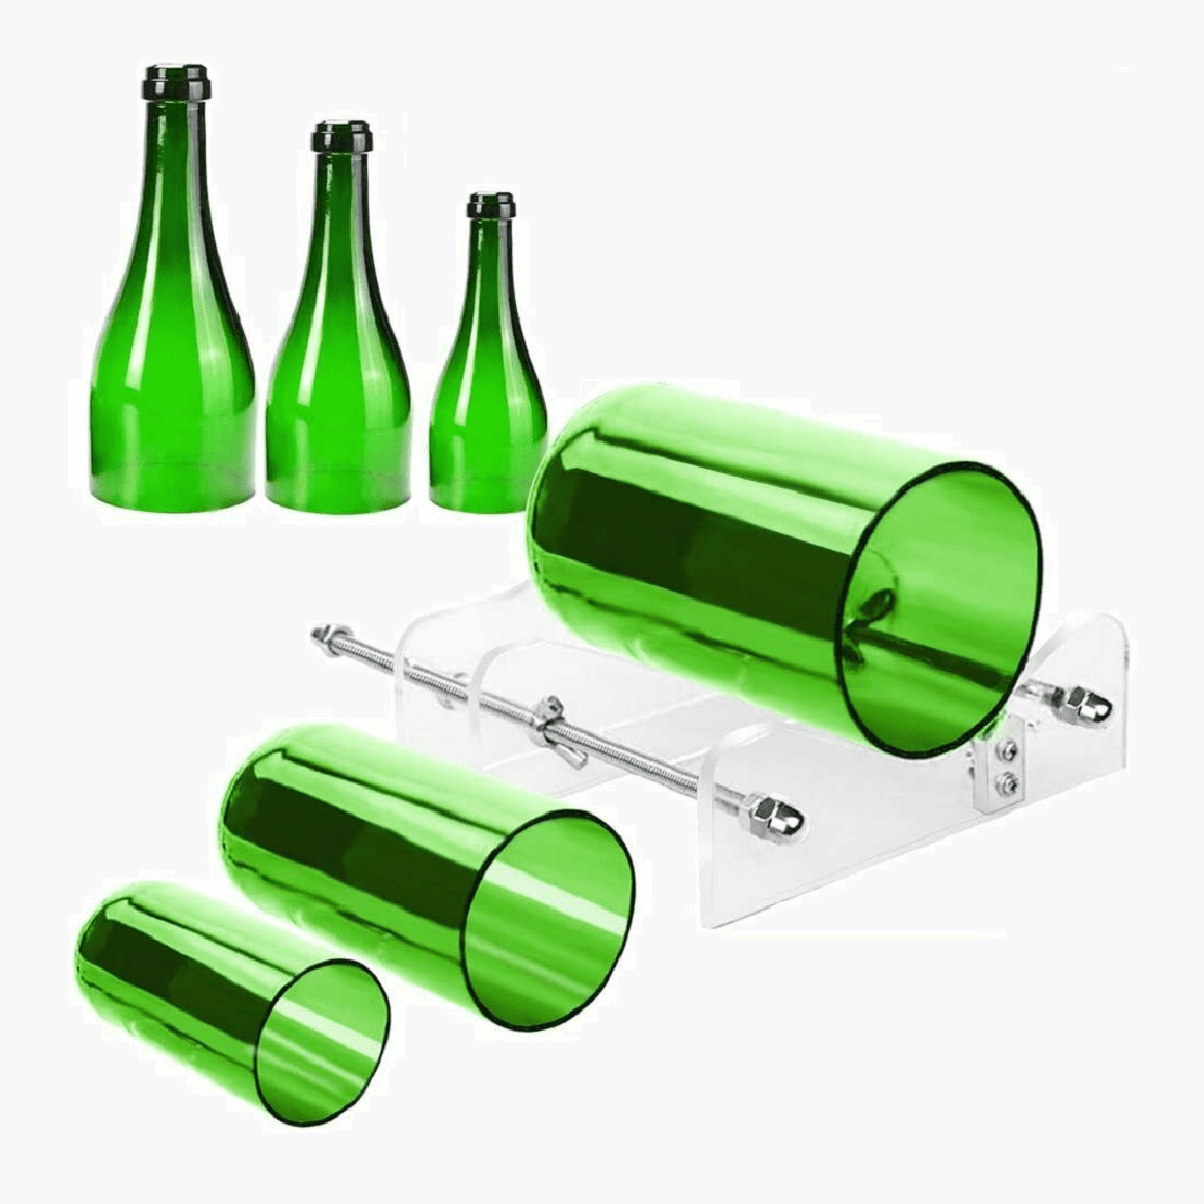 Wine Glass Bottle Cutter Kit Beer Jar DIY Cutting Machine Craft Recycle Tools 